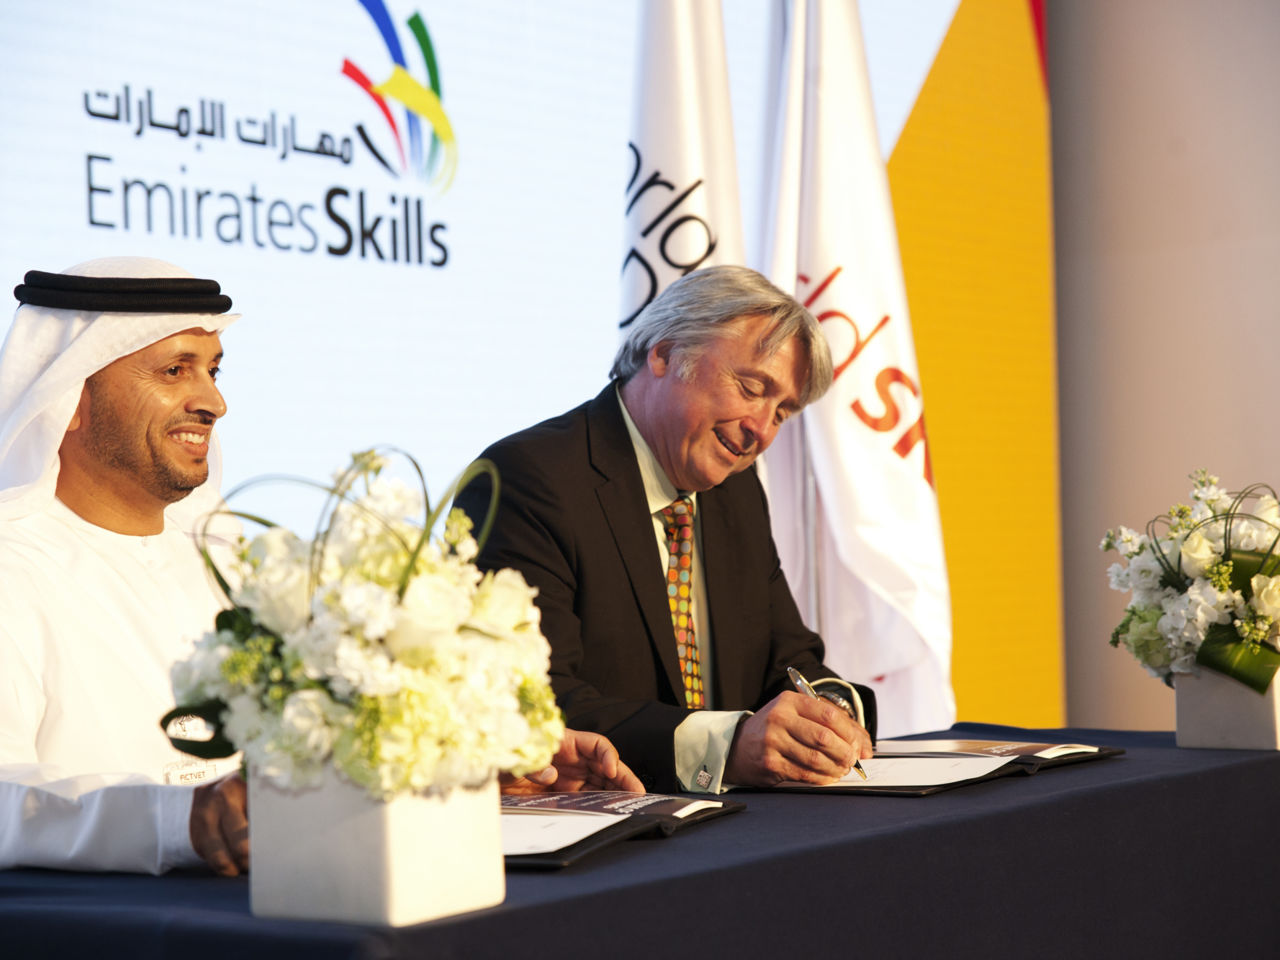 WorldSkills Competition coming to Abu Dhabi in 2017